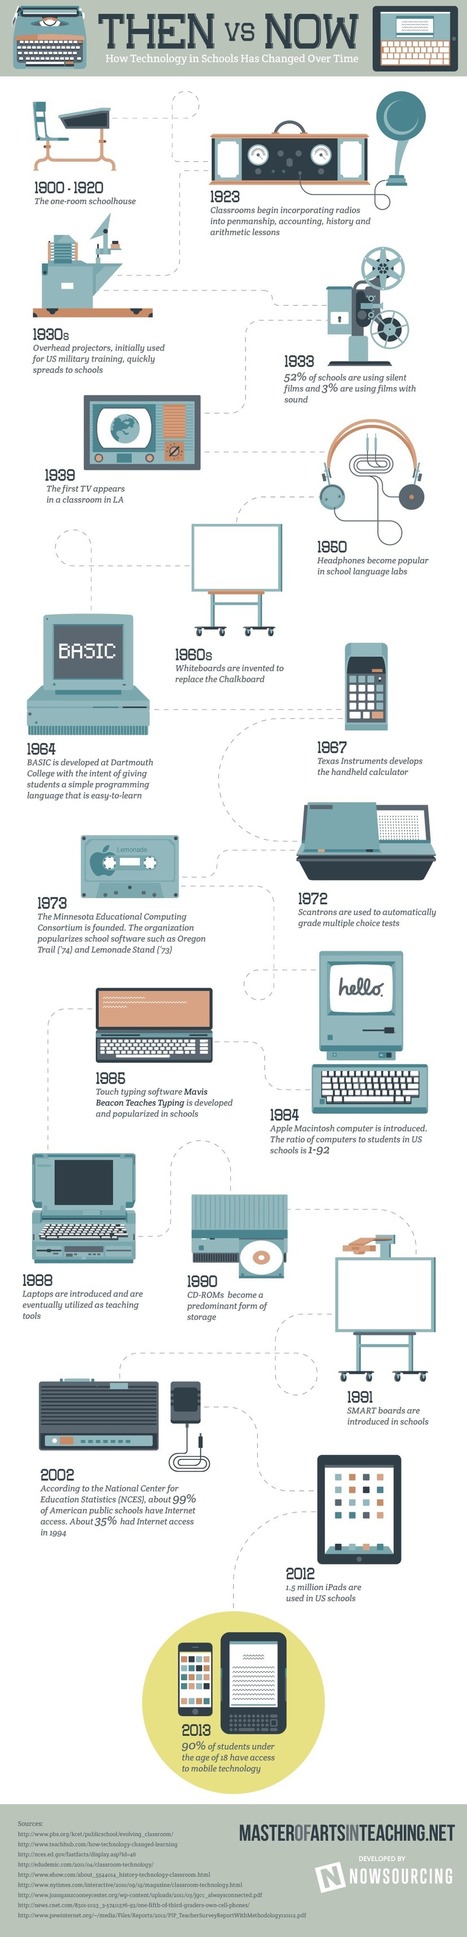 Timeline of Educational Technology in Schools Infographic | e-Learning Infographics | The 21st Century | Scoop.it